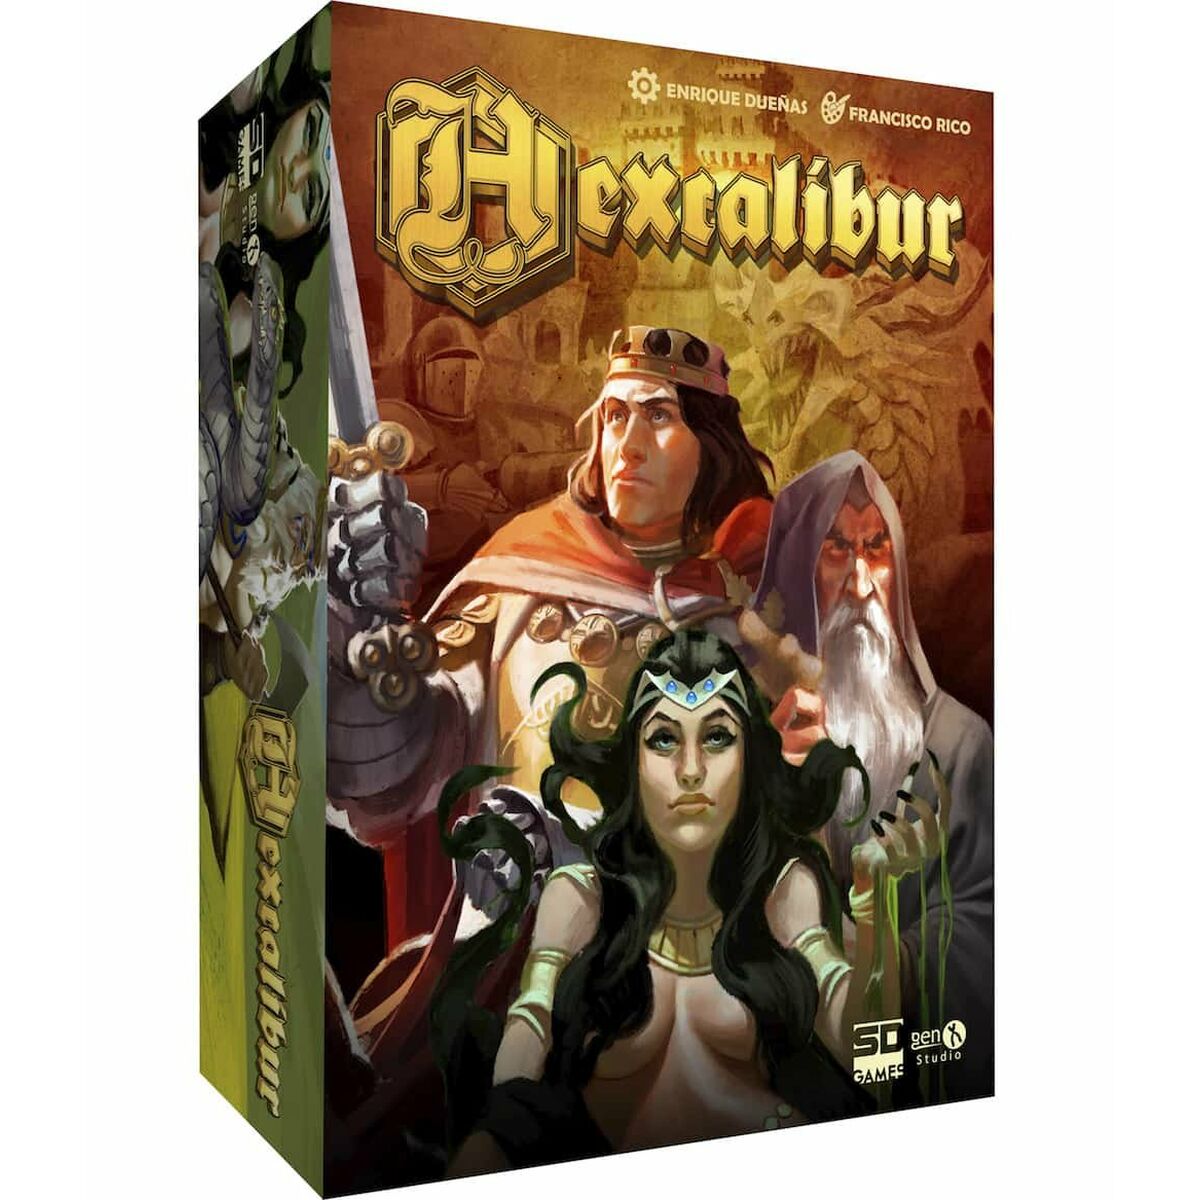 Board game SD Games Excalibur - Little Baby Shop